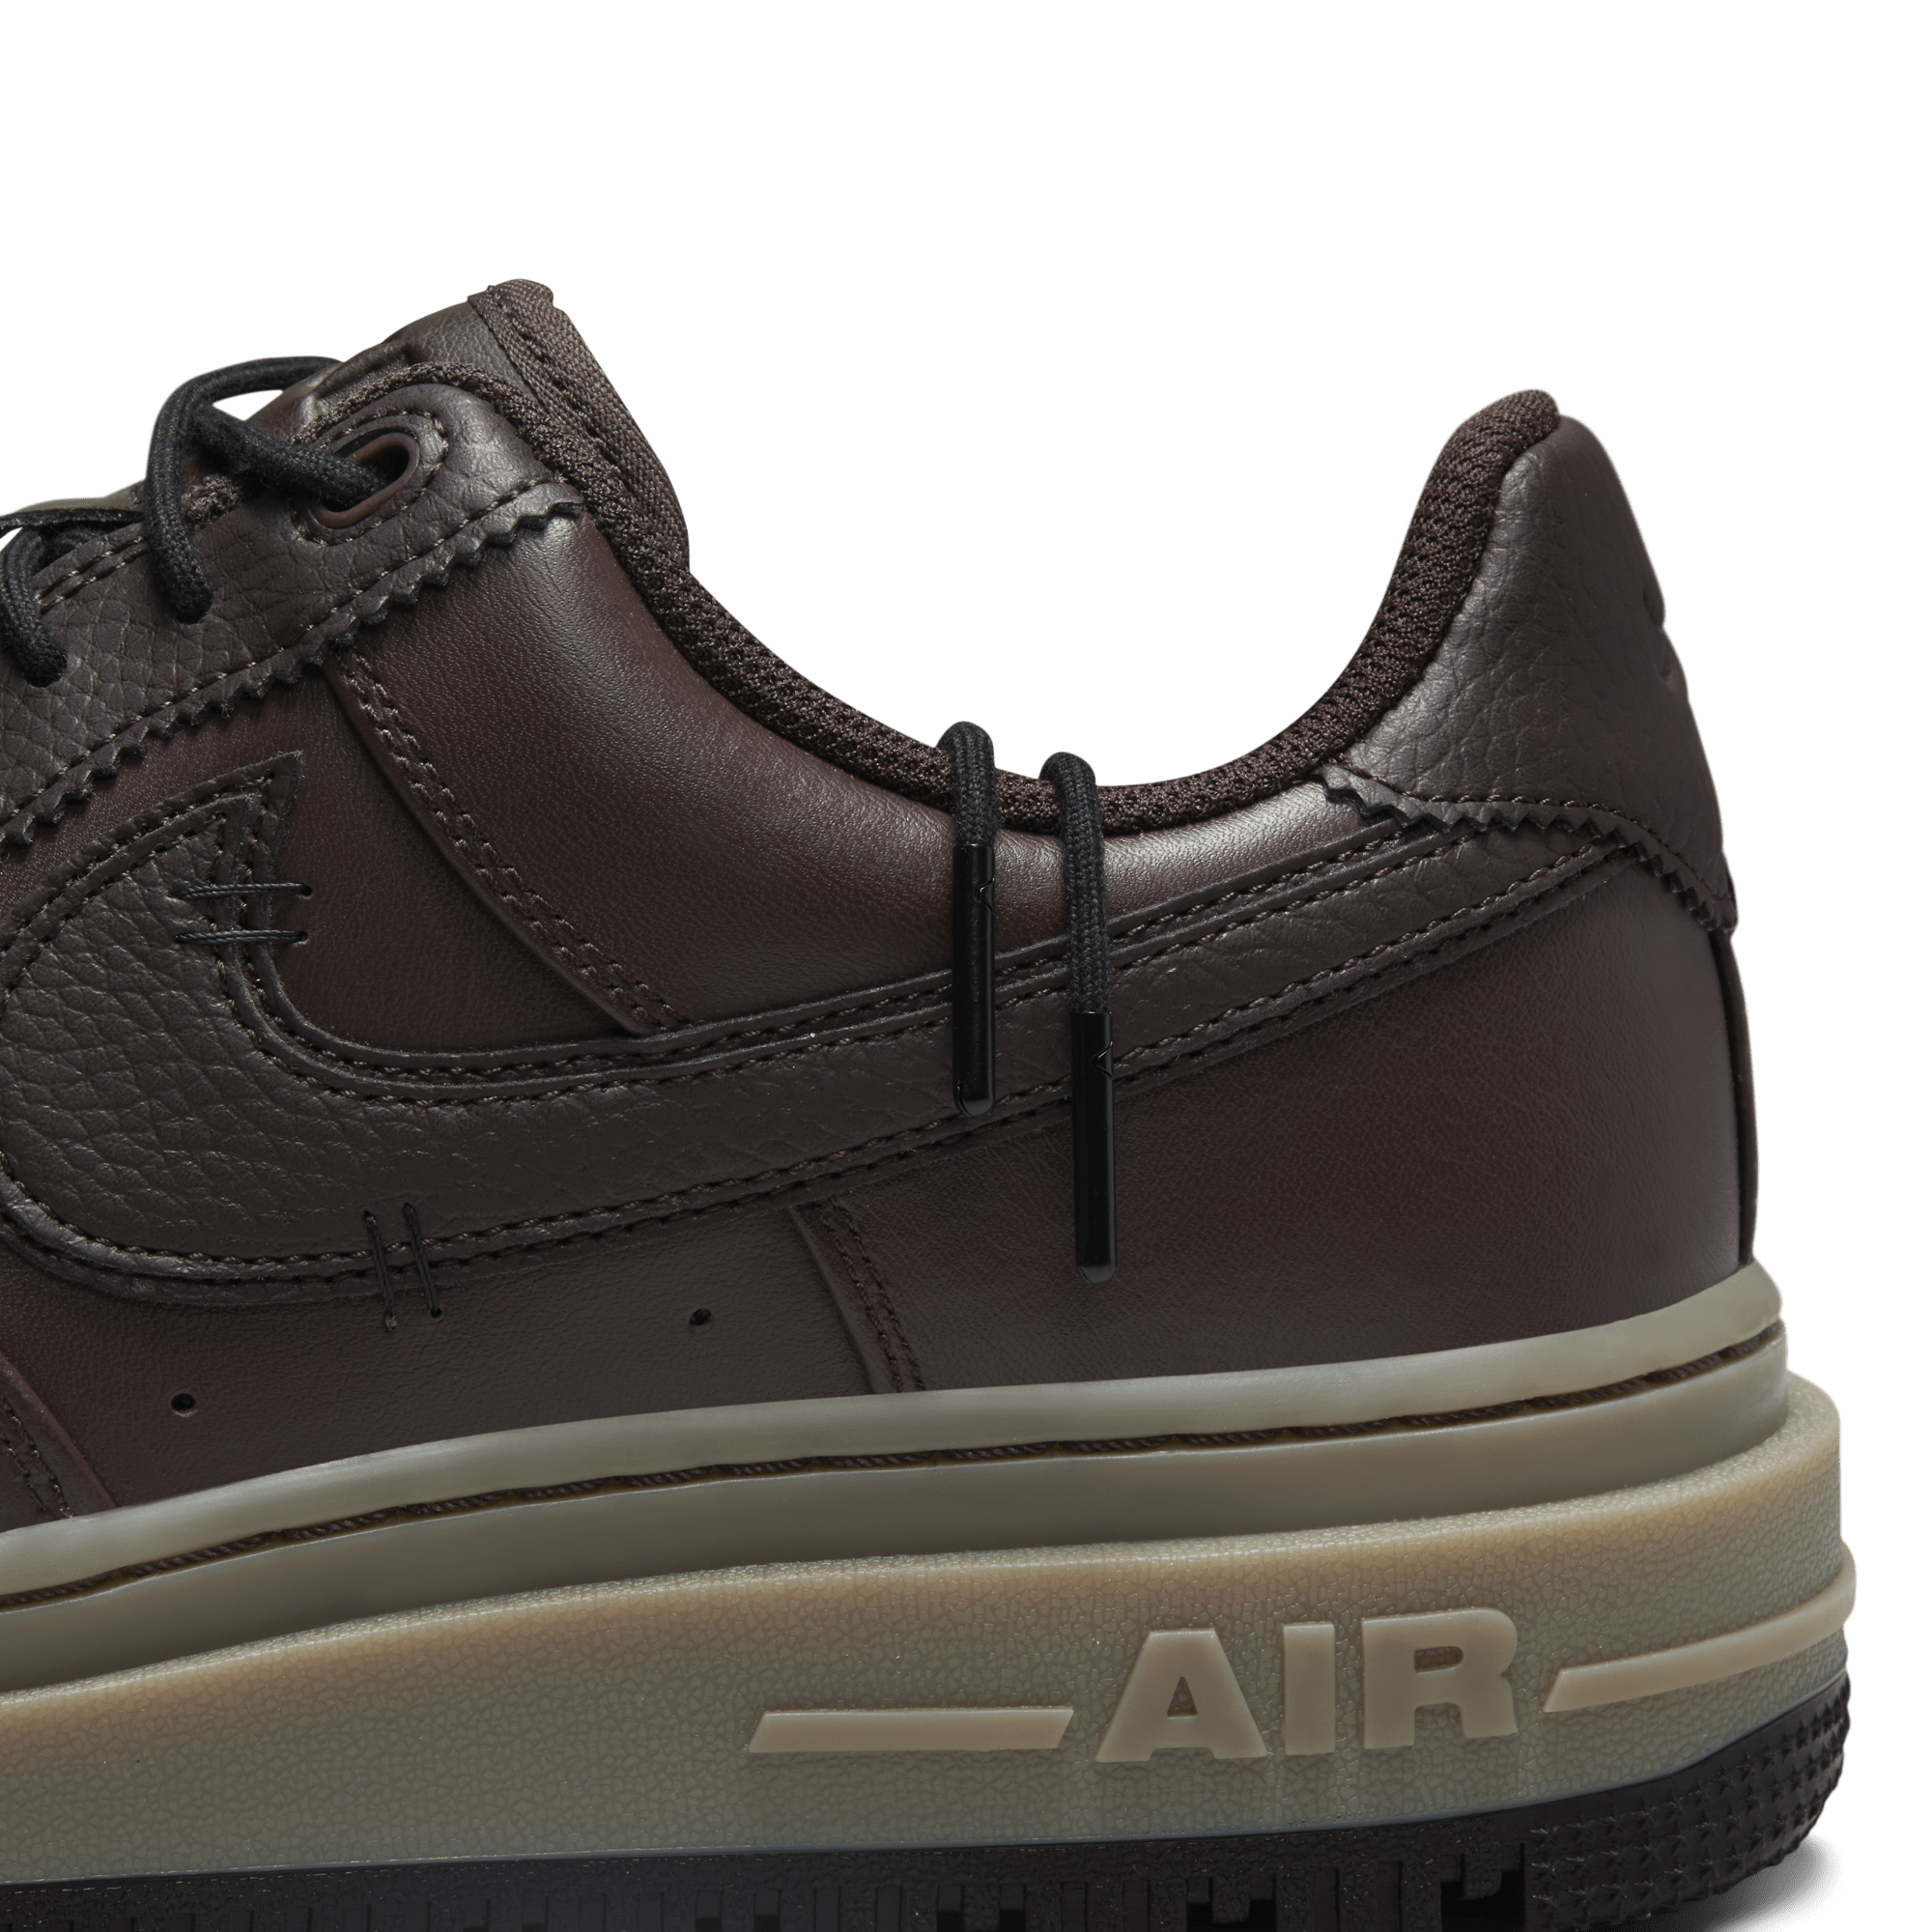 Nike Air Force 1 Utility Low Sequoia Green Black Gum Sole